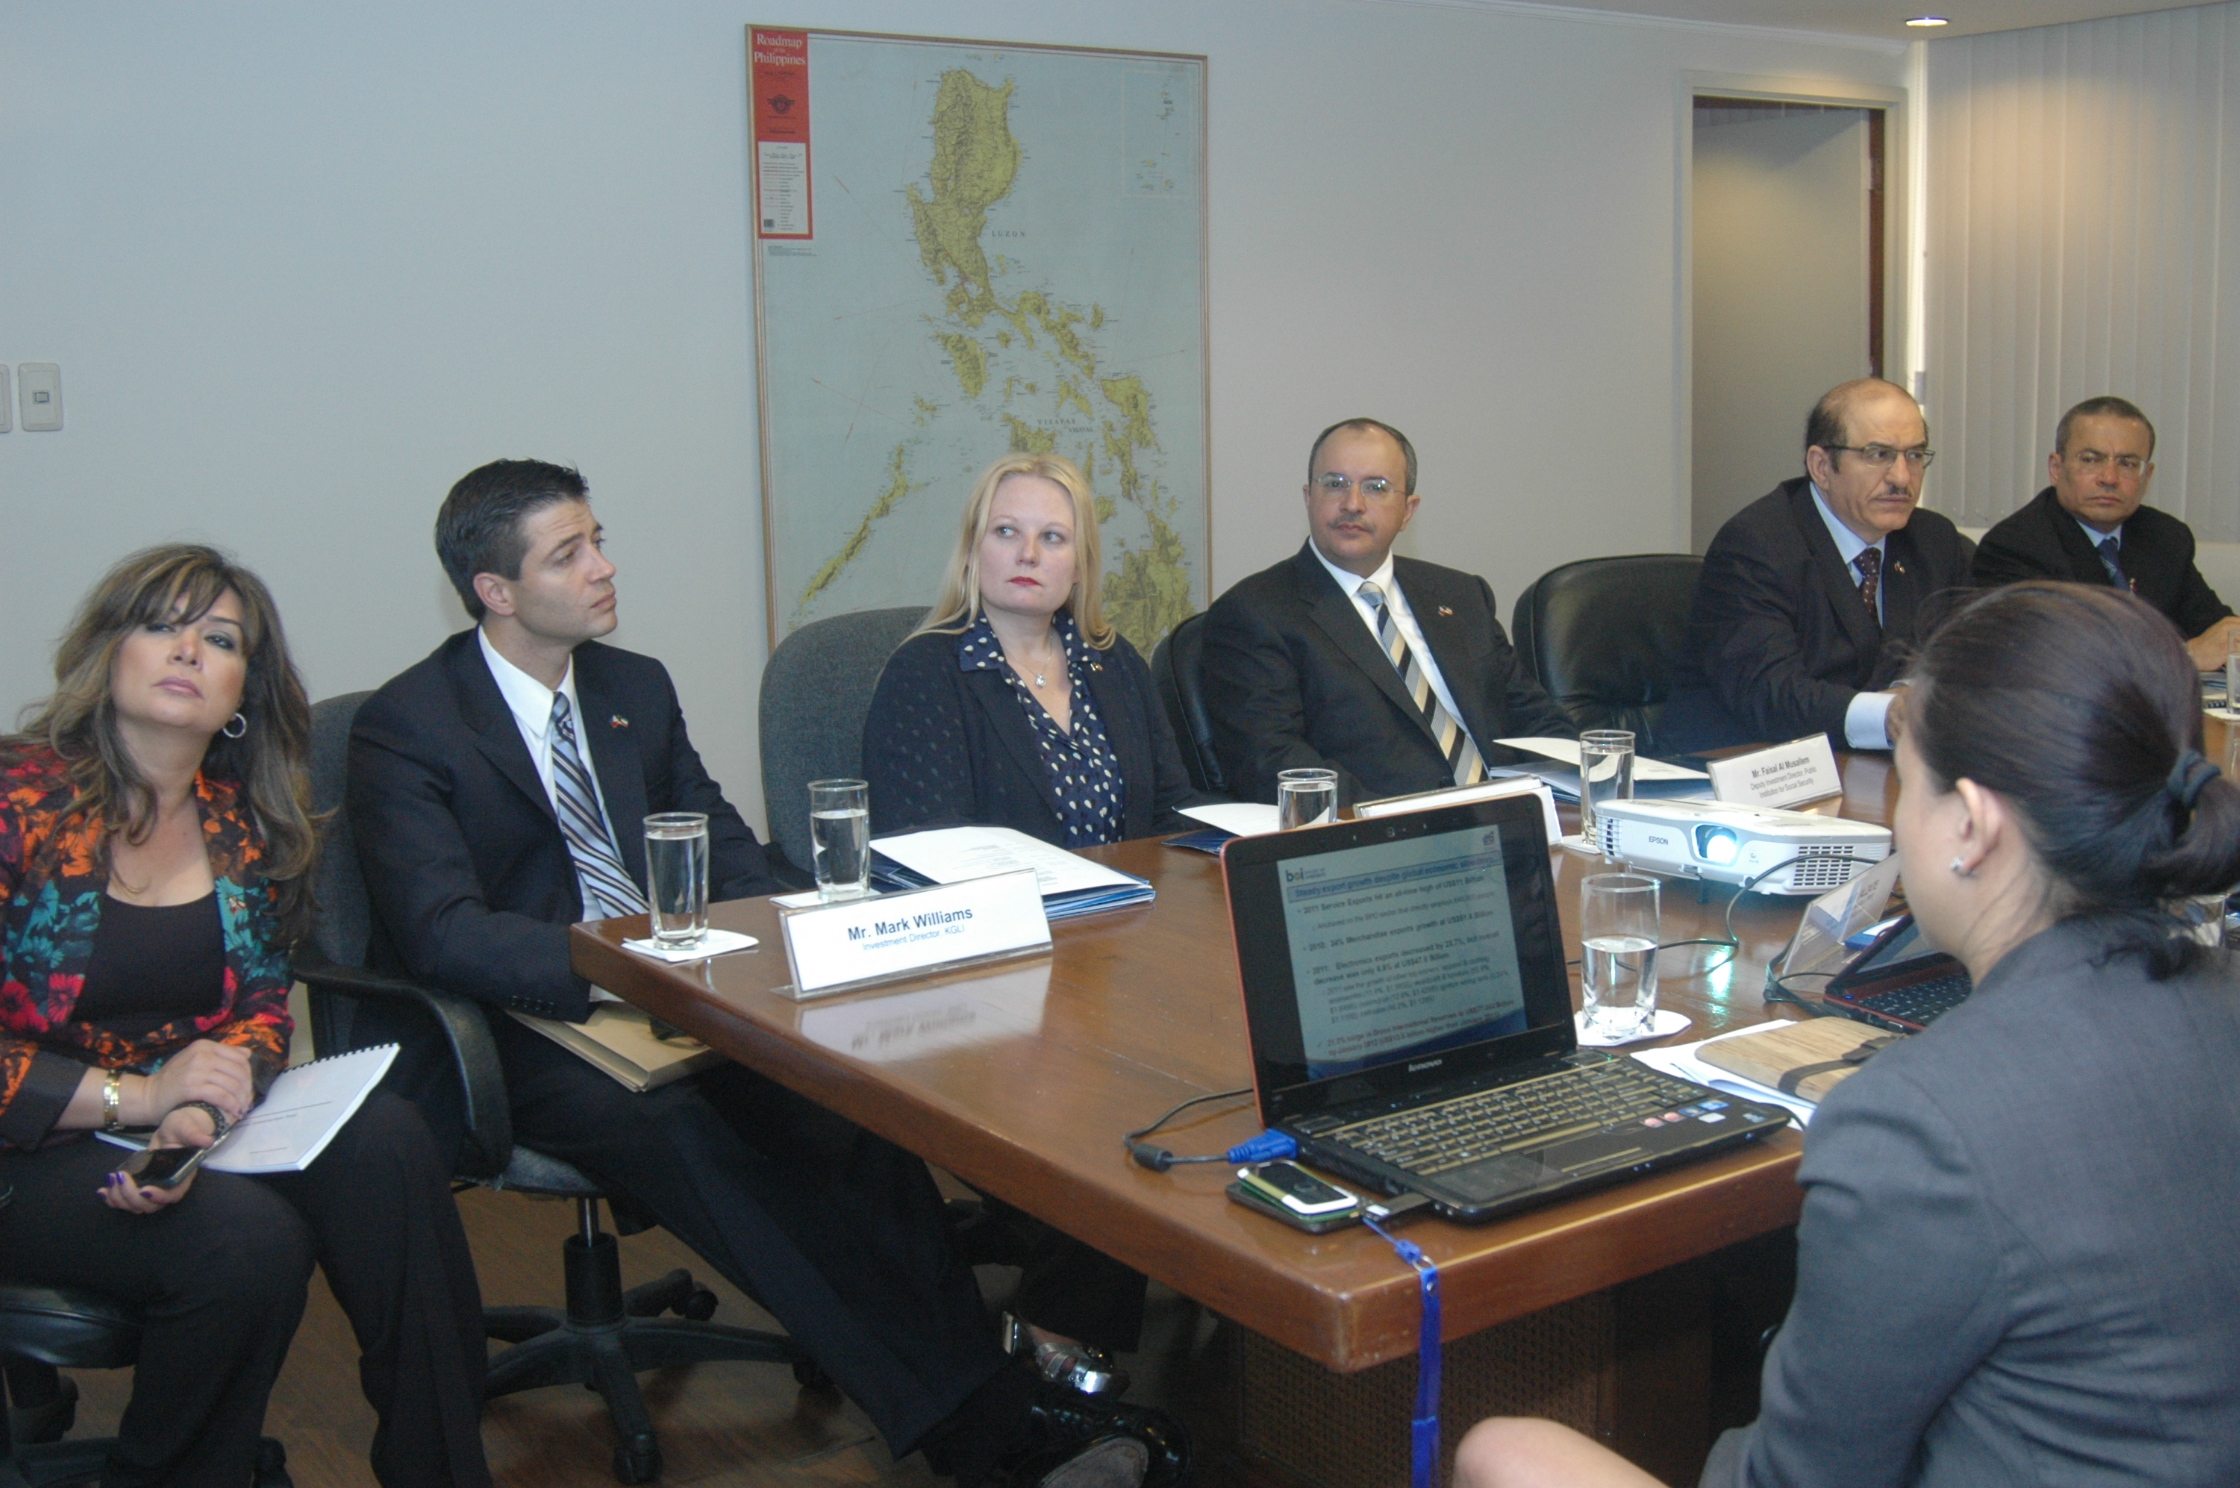 Marsha Lazareva (third from left) attends a meeting related to the naming of the Global Gateway Logistics City in honor of the Amir of Kuwait in March 2012. Courtesty of KGL Investment